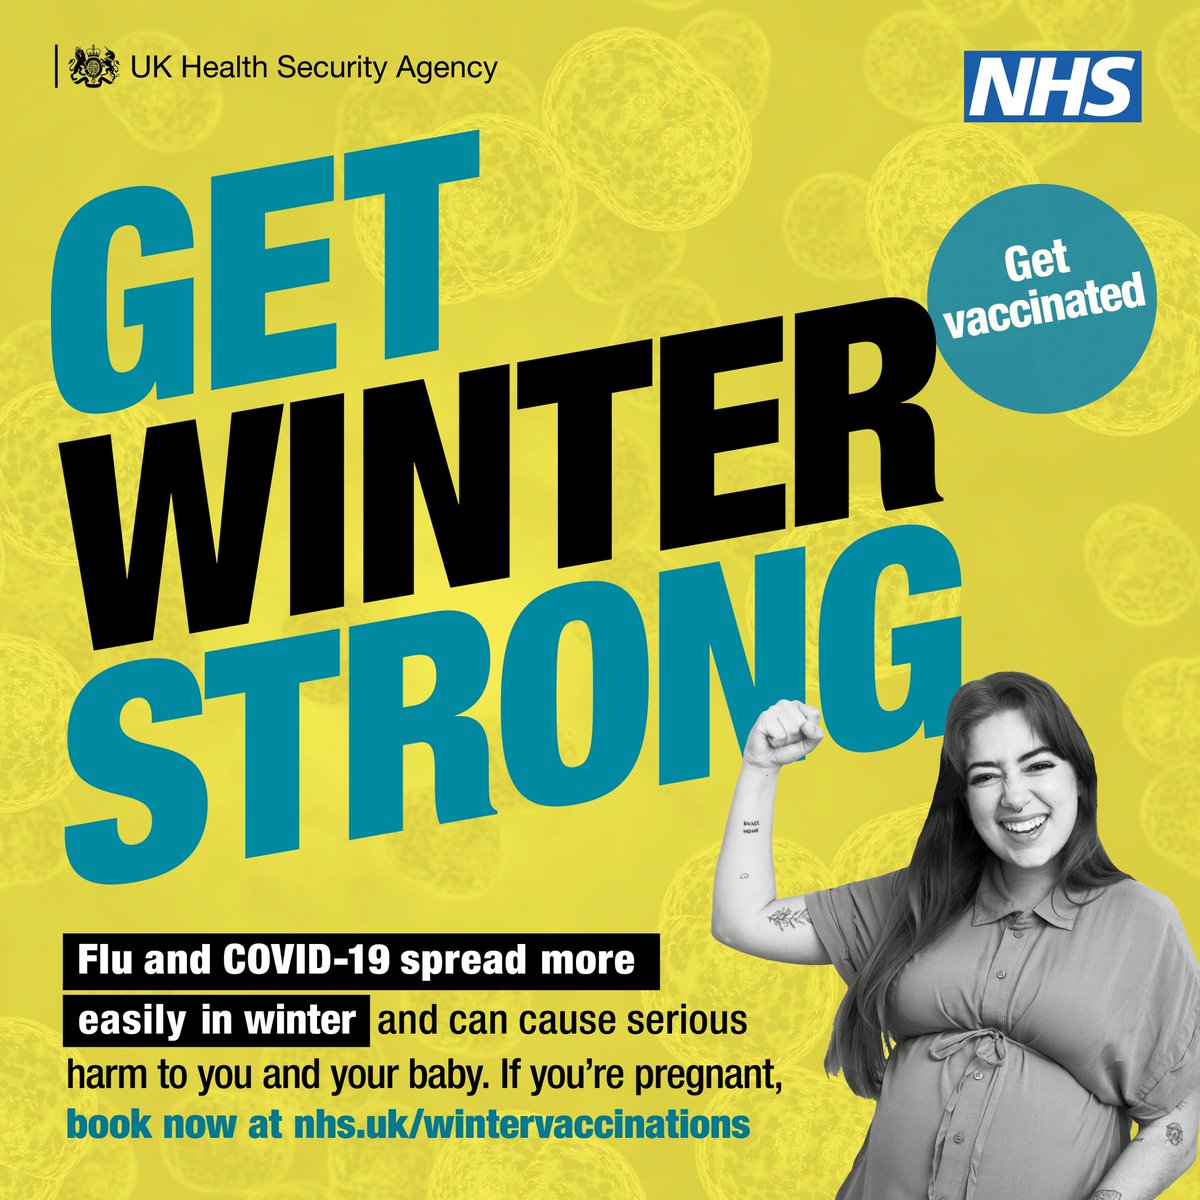 Pregnant? Flu and Covid-19 can cause serious harm to you and to your baby. Book a vaccination now at nhs.uk/wintervaccinat…